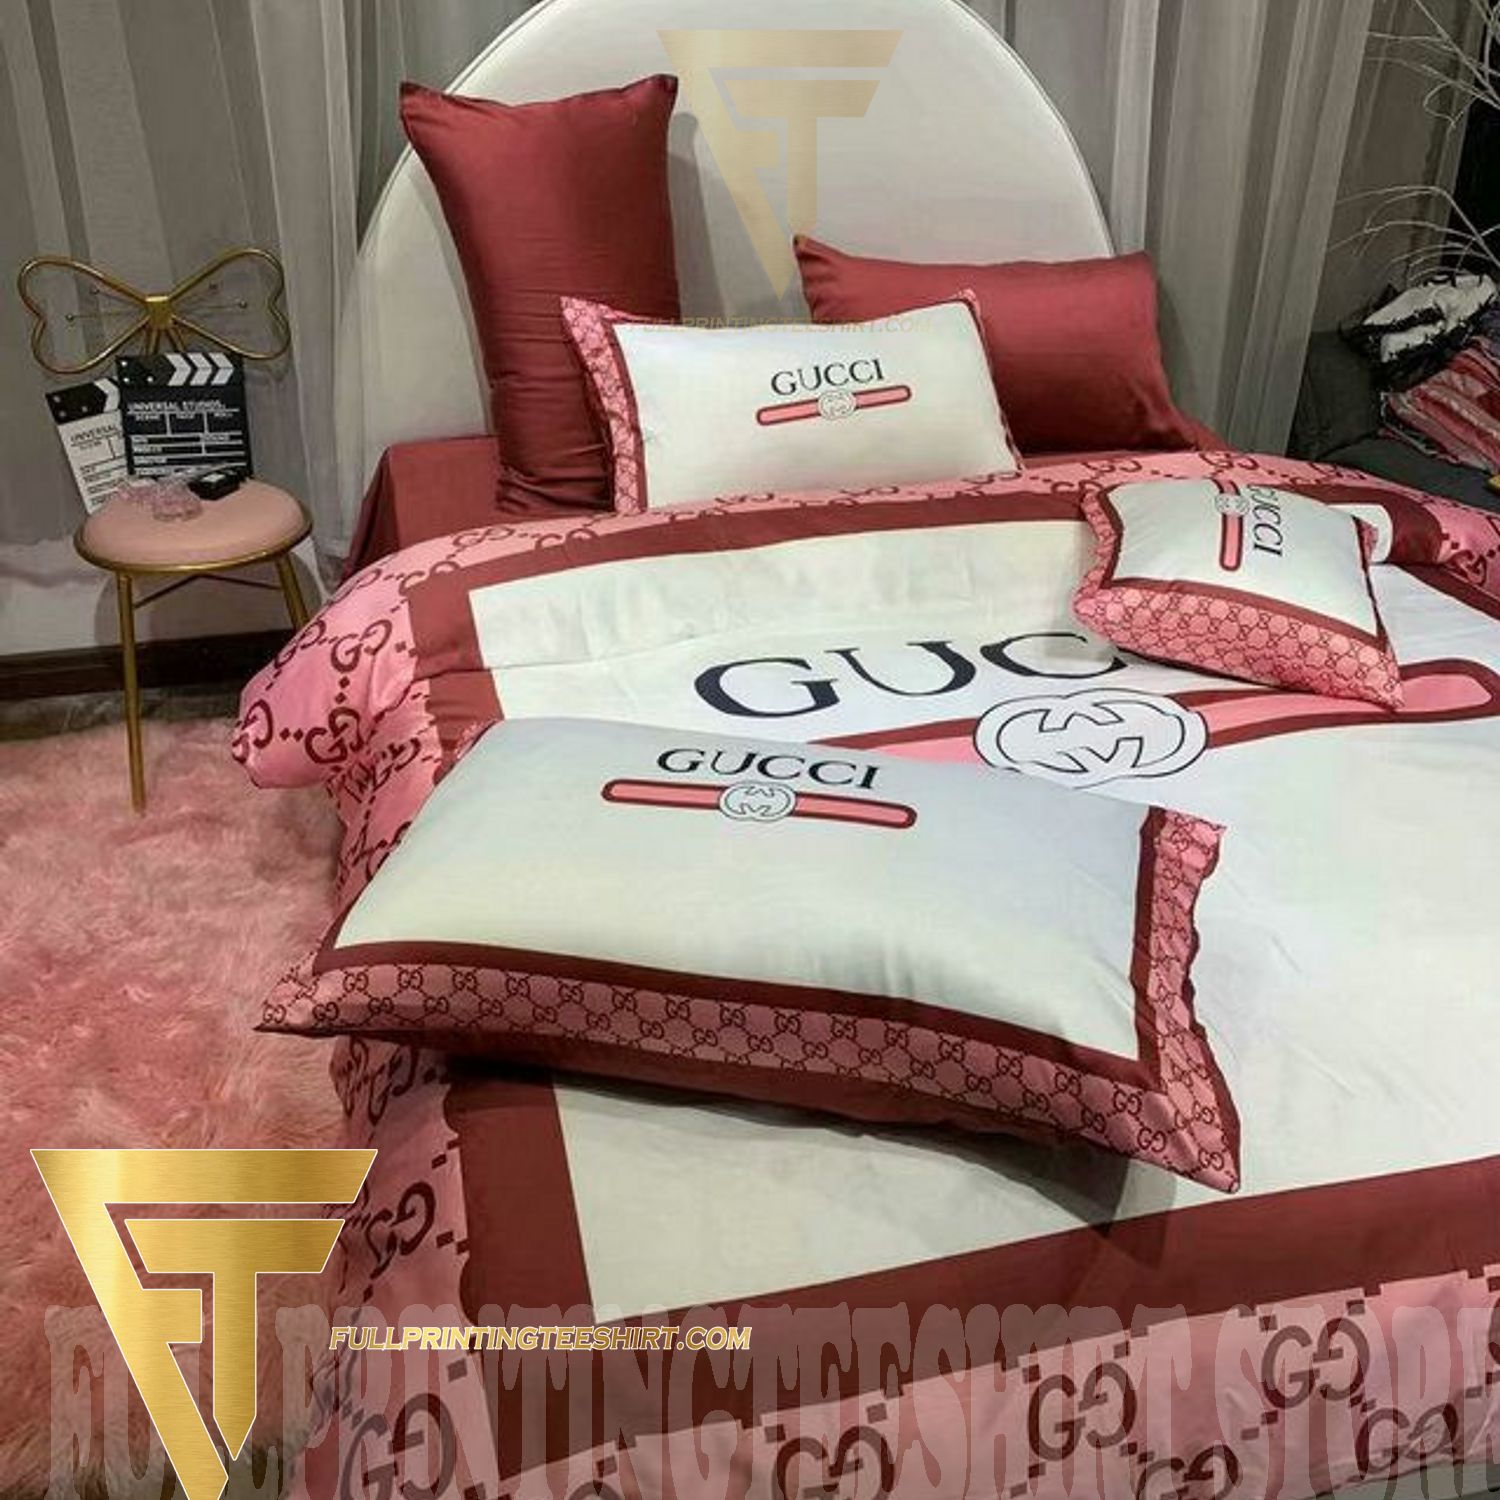 Top-selling item] Gucci Type 74 Luxury Brand Home Decor Duvet Cover Bedroom  Sets